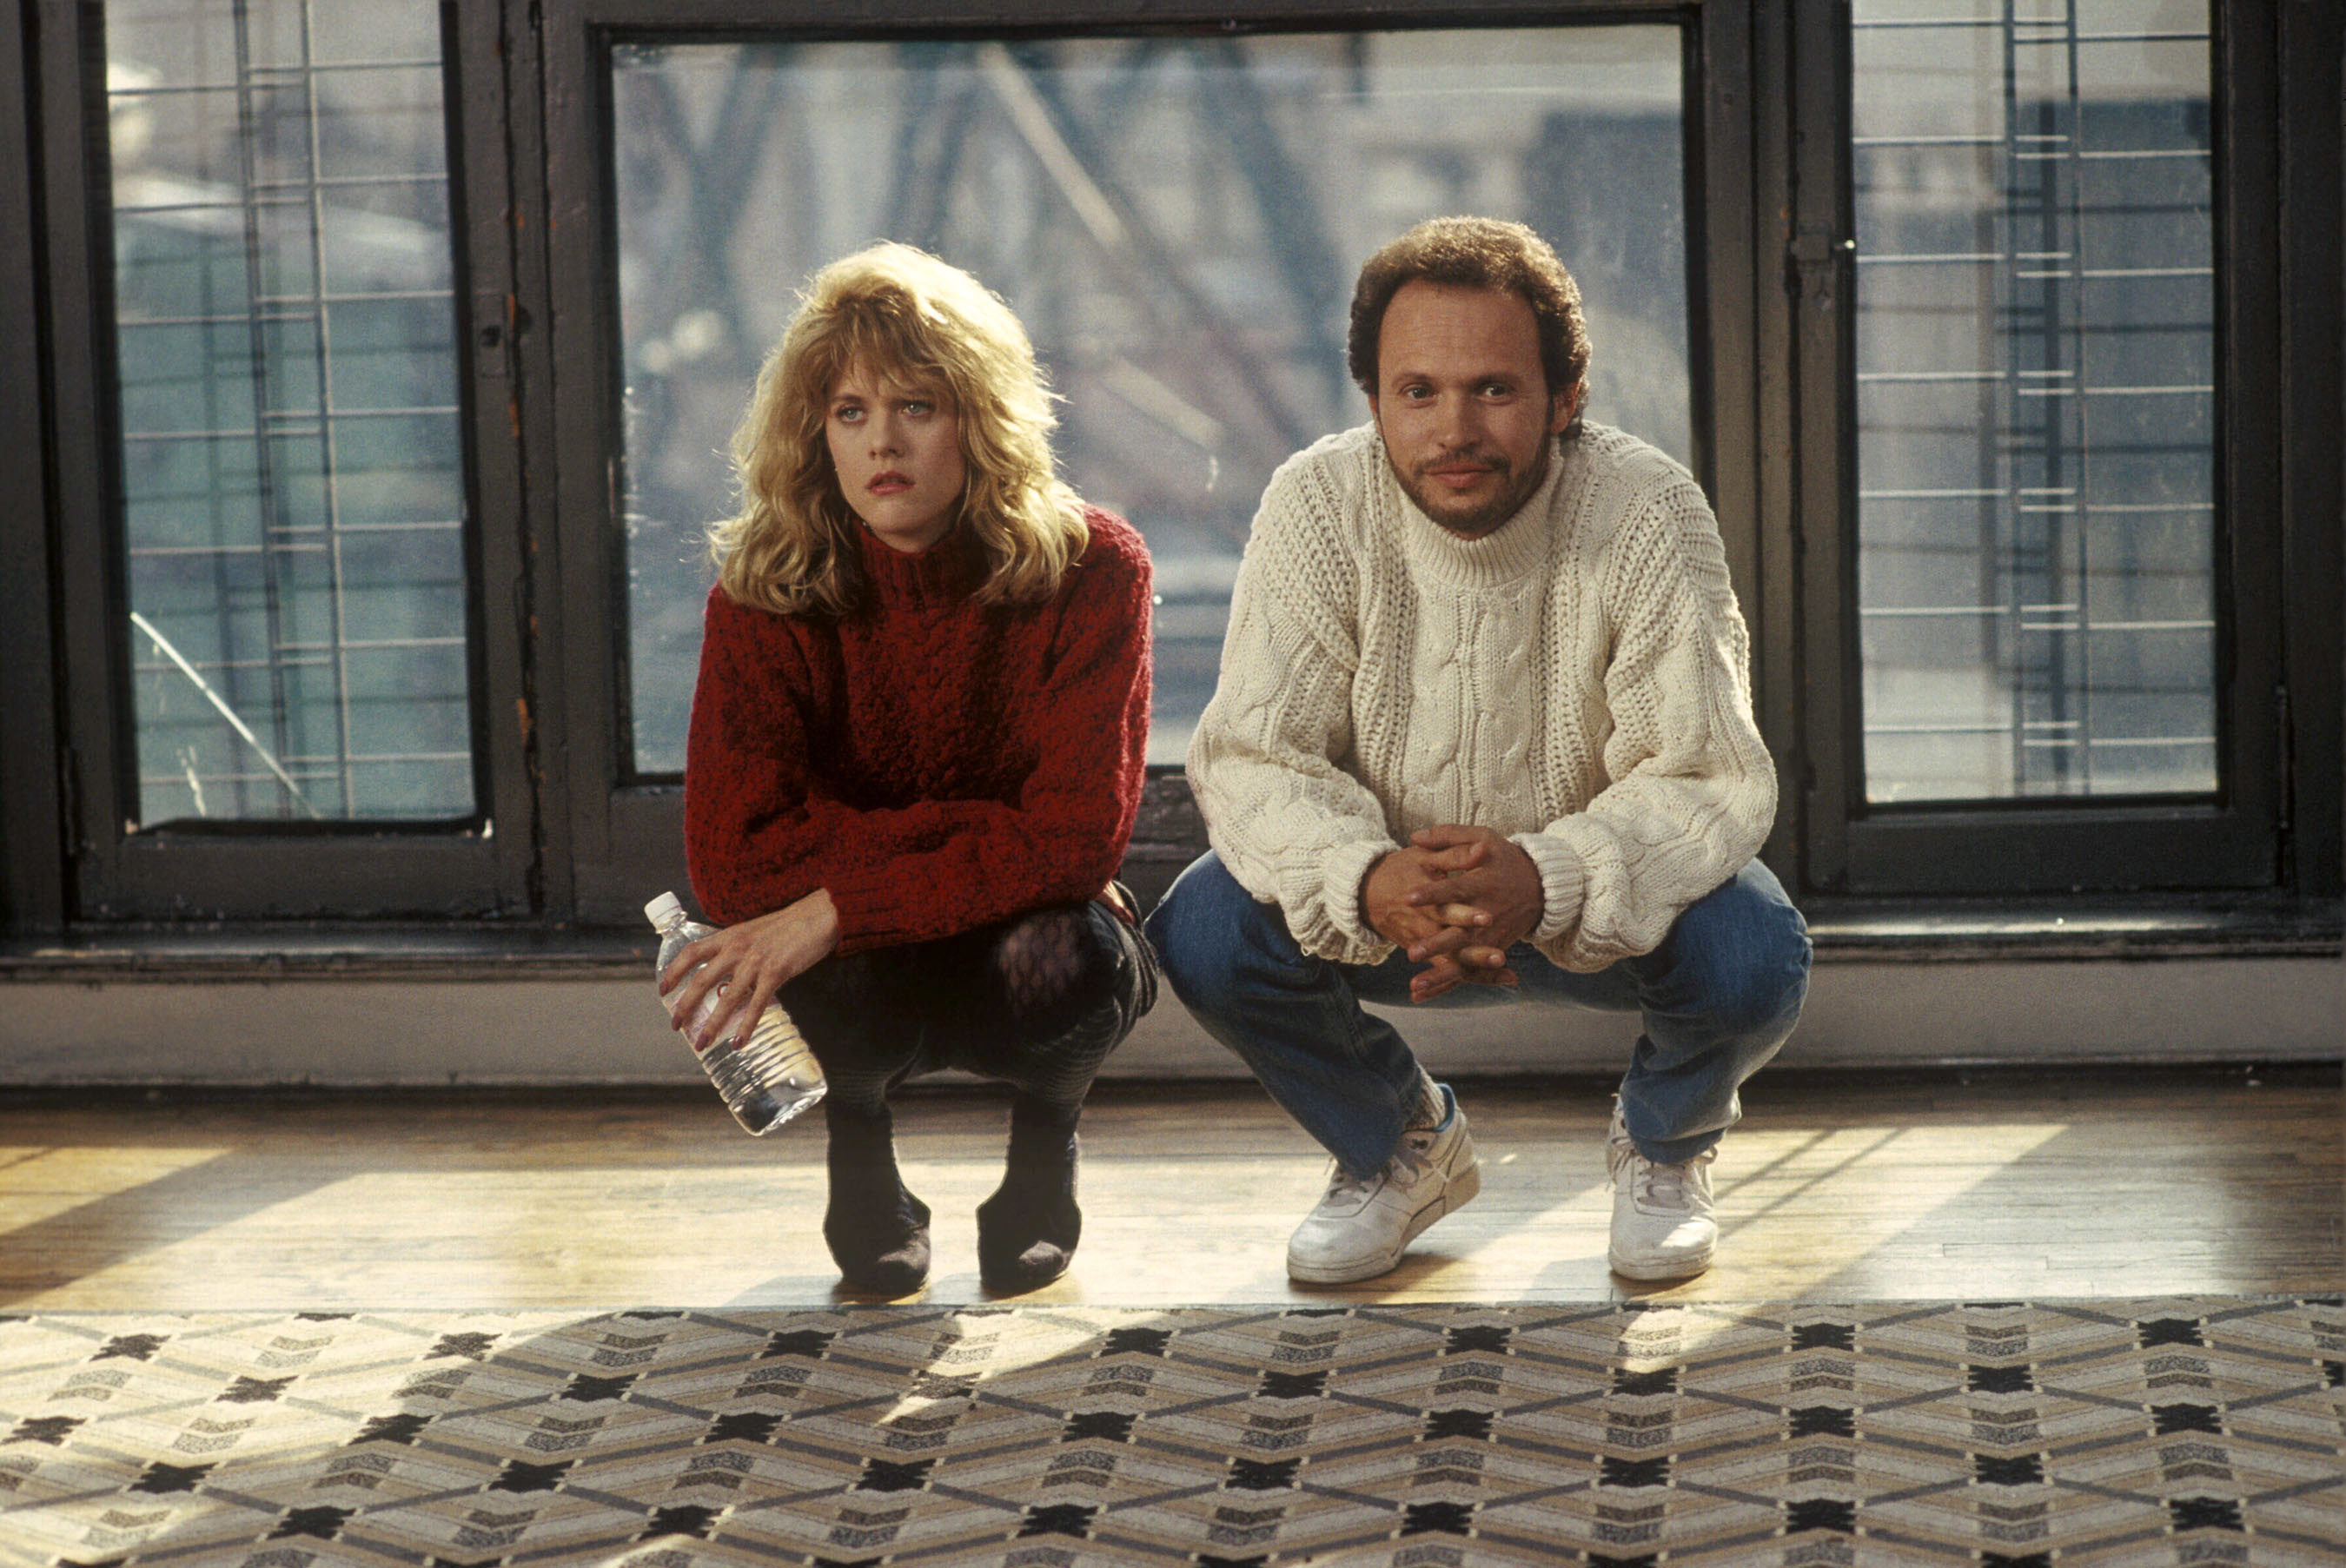 Meg Ryan and Billy Crystal sit in a squatting manner.